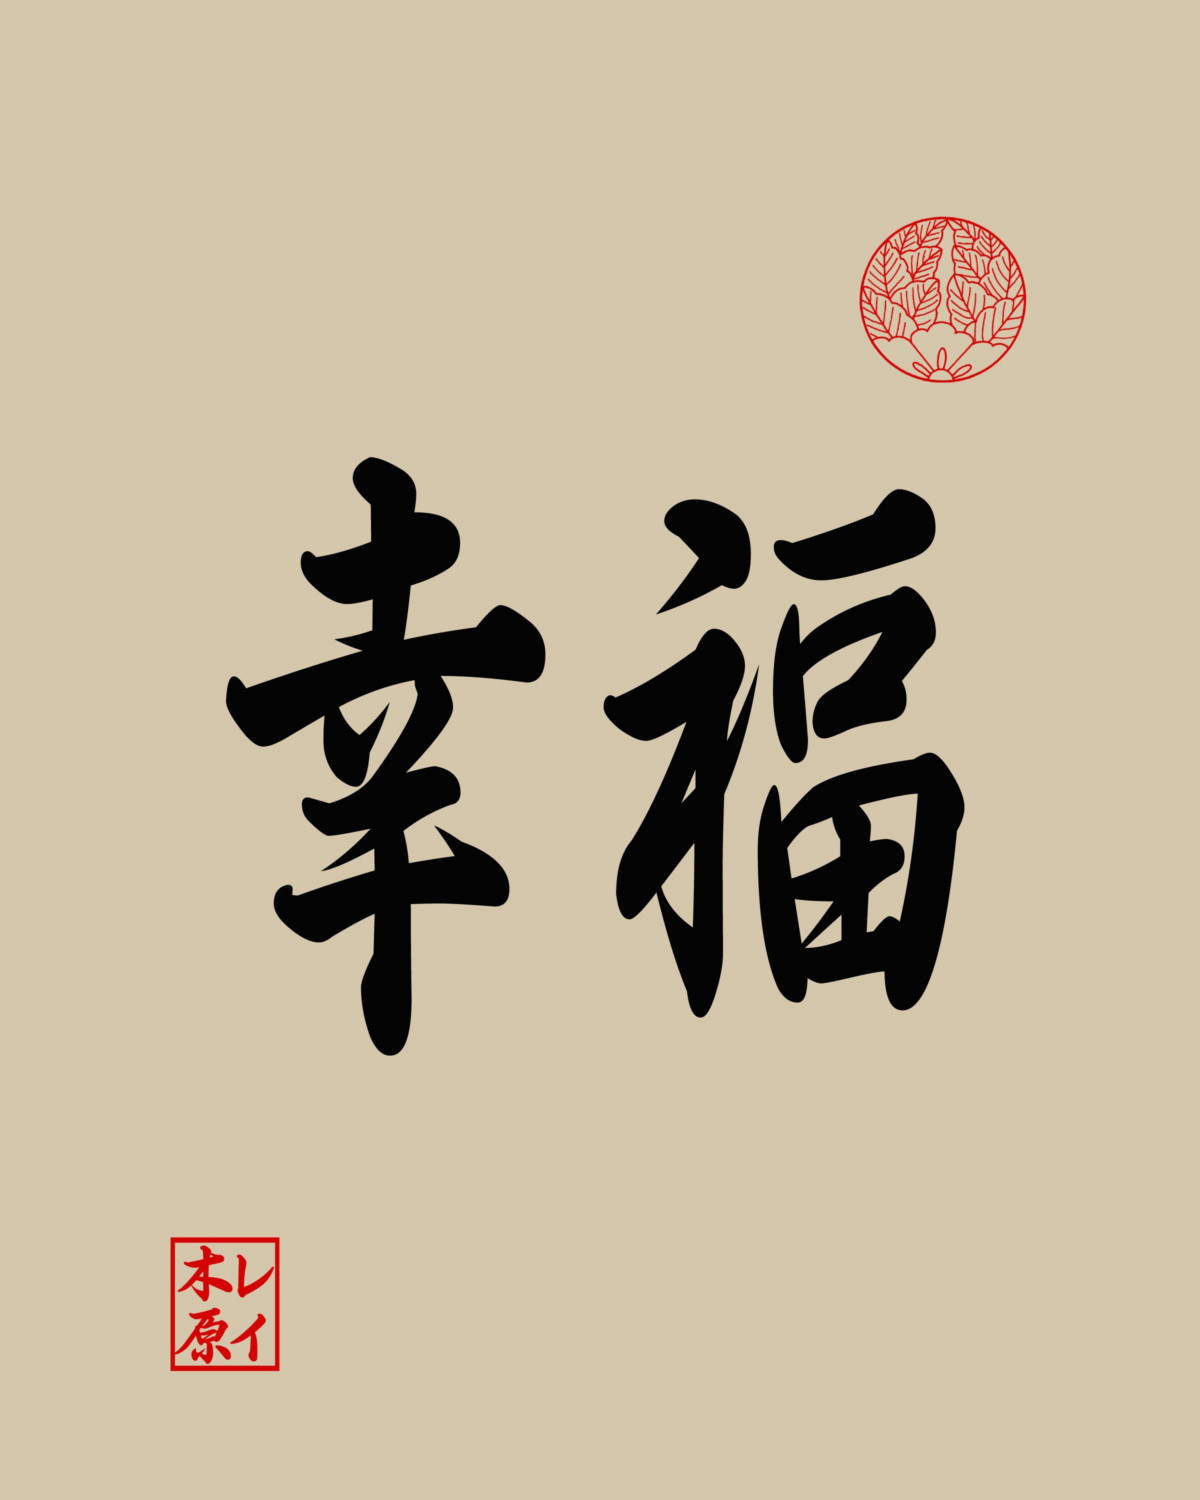 Happiness Written In Kanji - Calligraphy , HD Wallpaper & Backgrounds